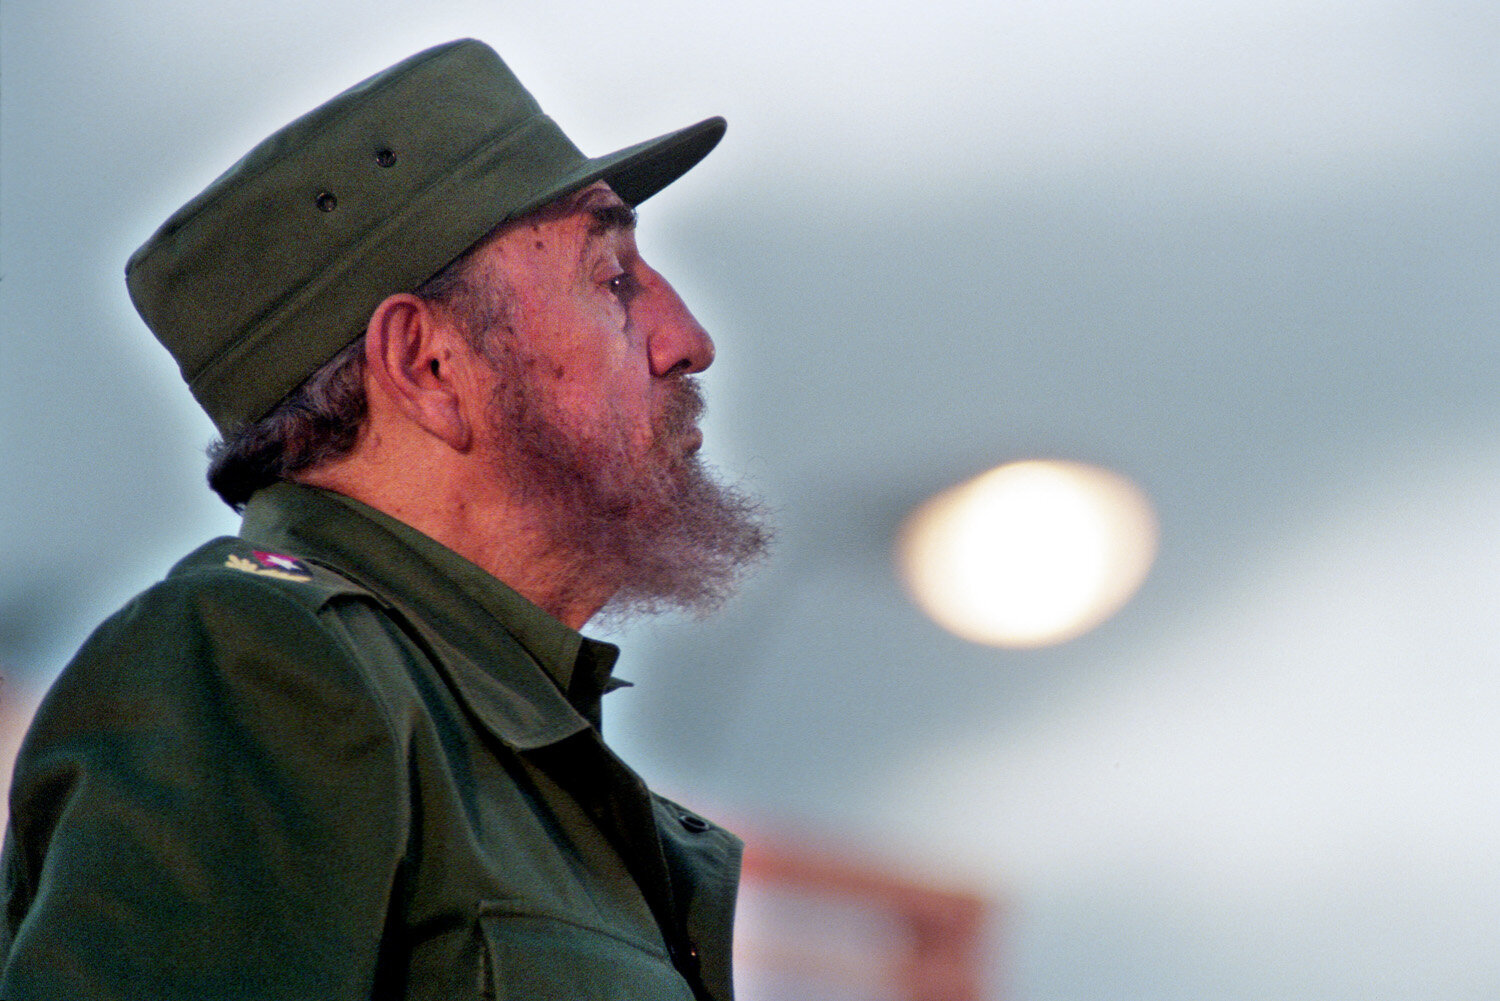  Fidel Castro addressing the crowd as celebrating the 46th anniversary of the Moncada assault, led by Fidel Castro on July 26, 1953. 